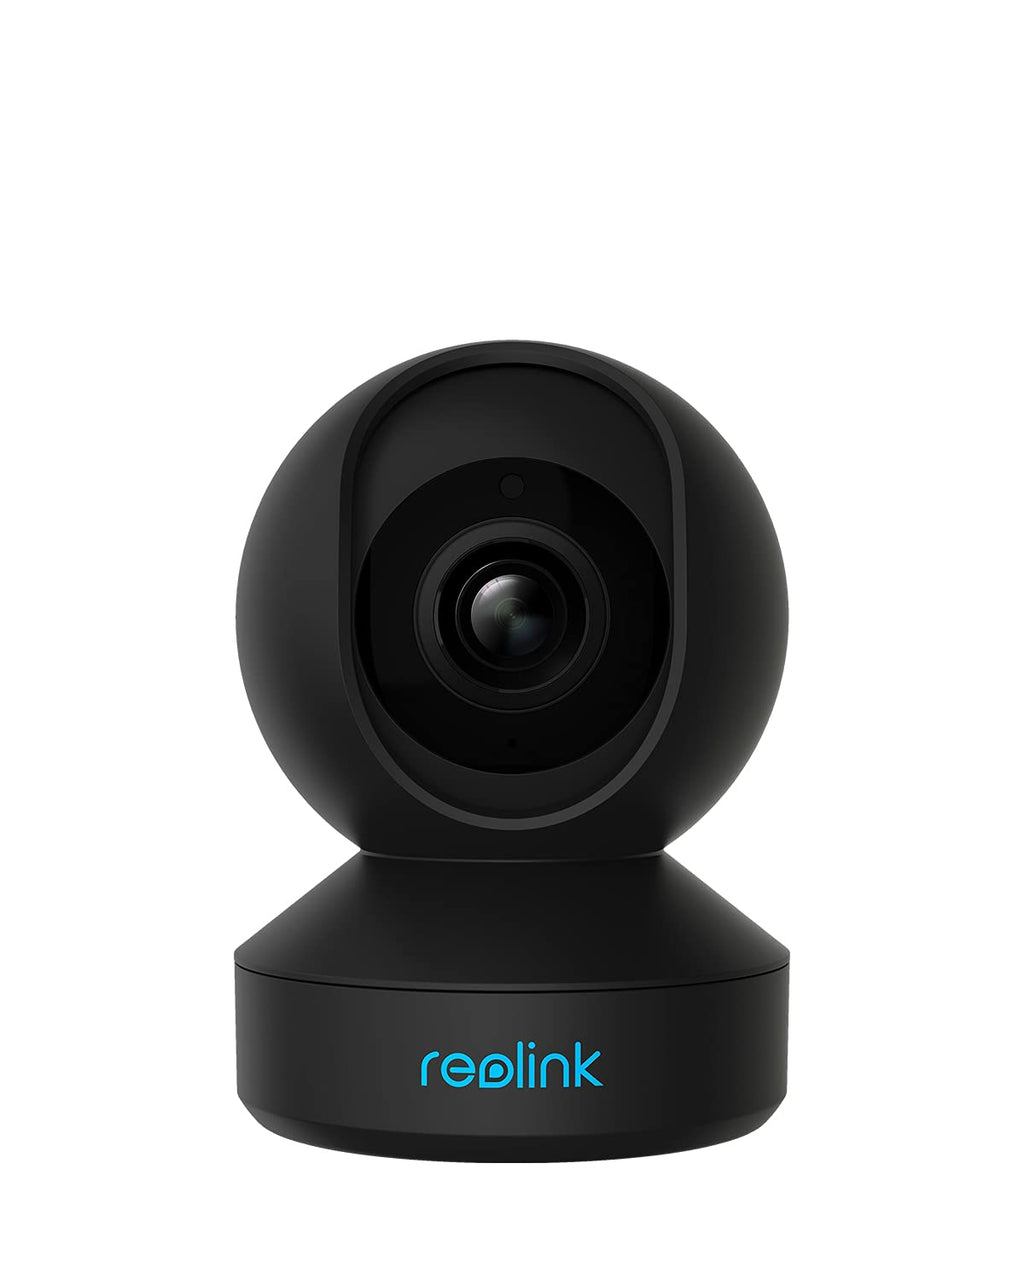 Reolink E1 Pro 4MP HD Plug-in Home Security Indoor Camera with 2.4/5 GHz Wi-Fi, Two Way Talk, Motion Alert, Multiple Storage Options, Ideal for Baby Monitor/ Pet Camera Black